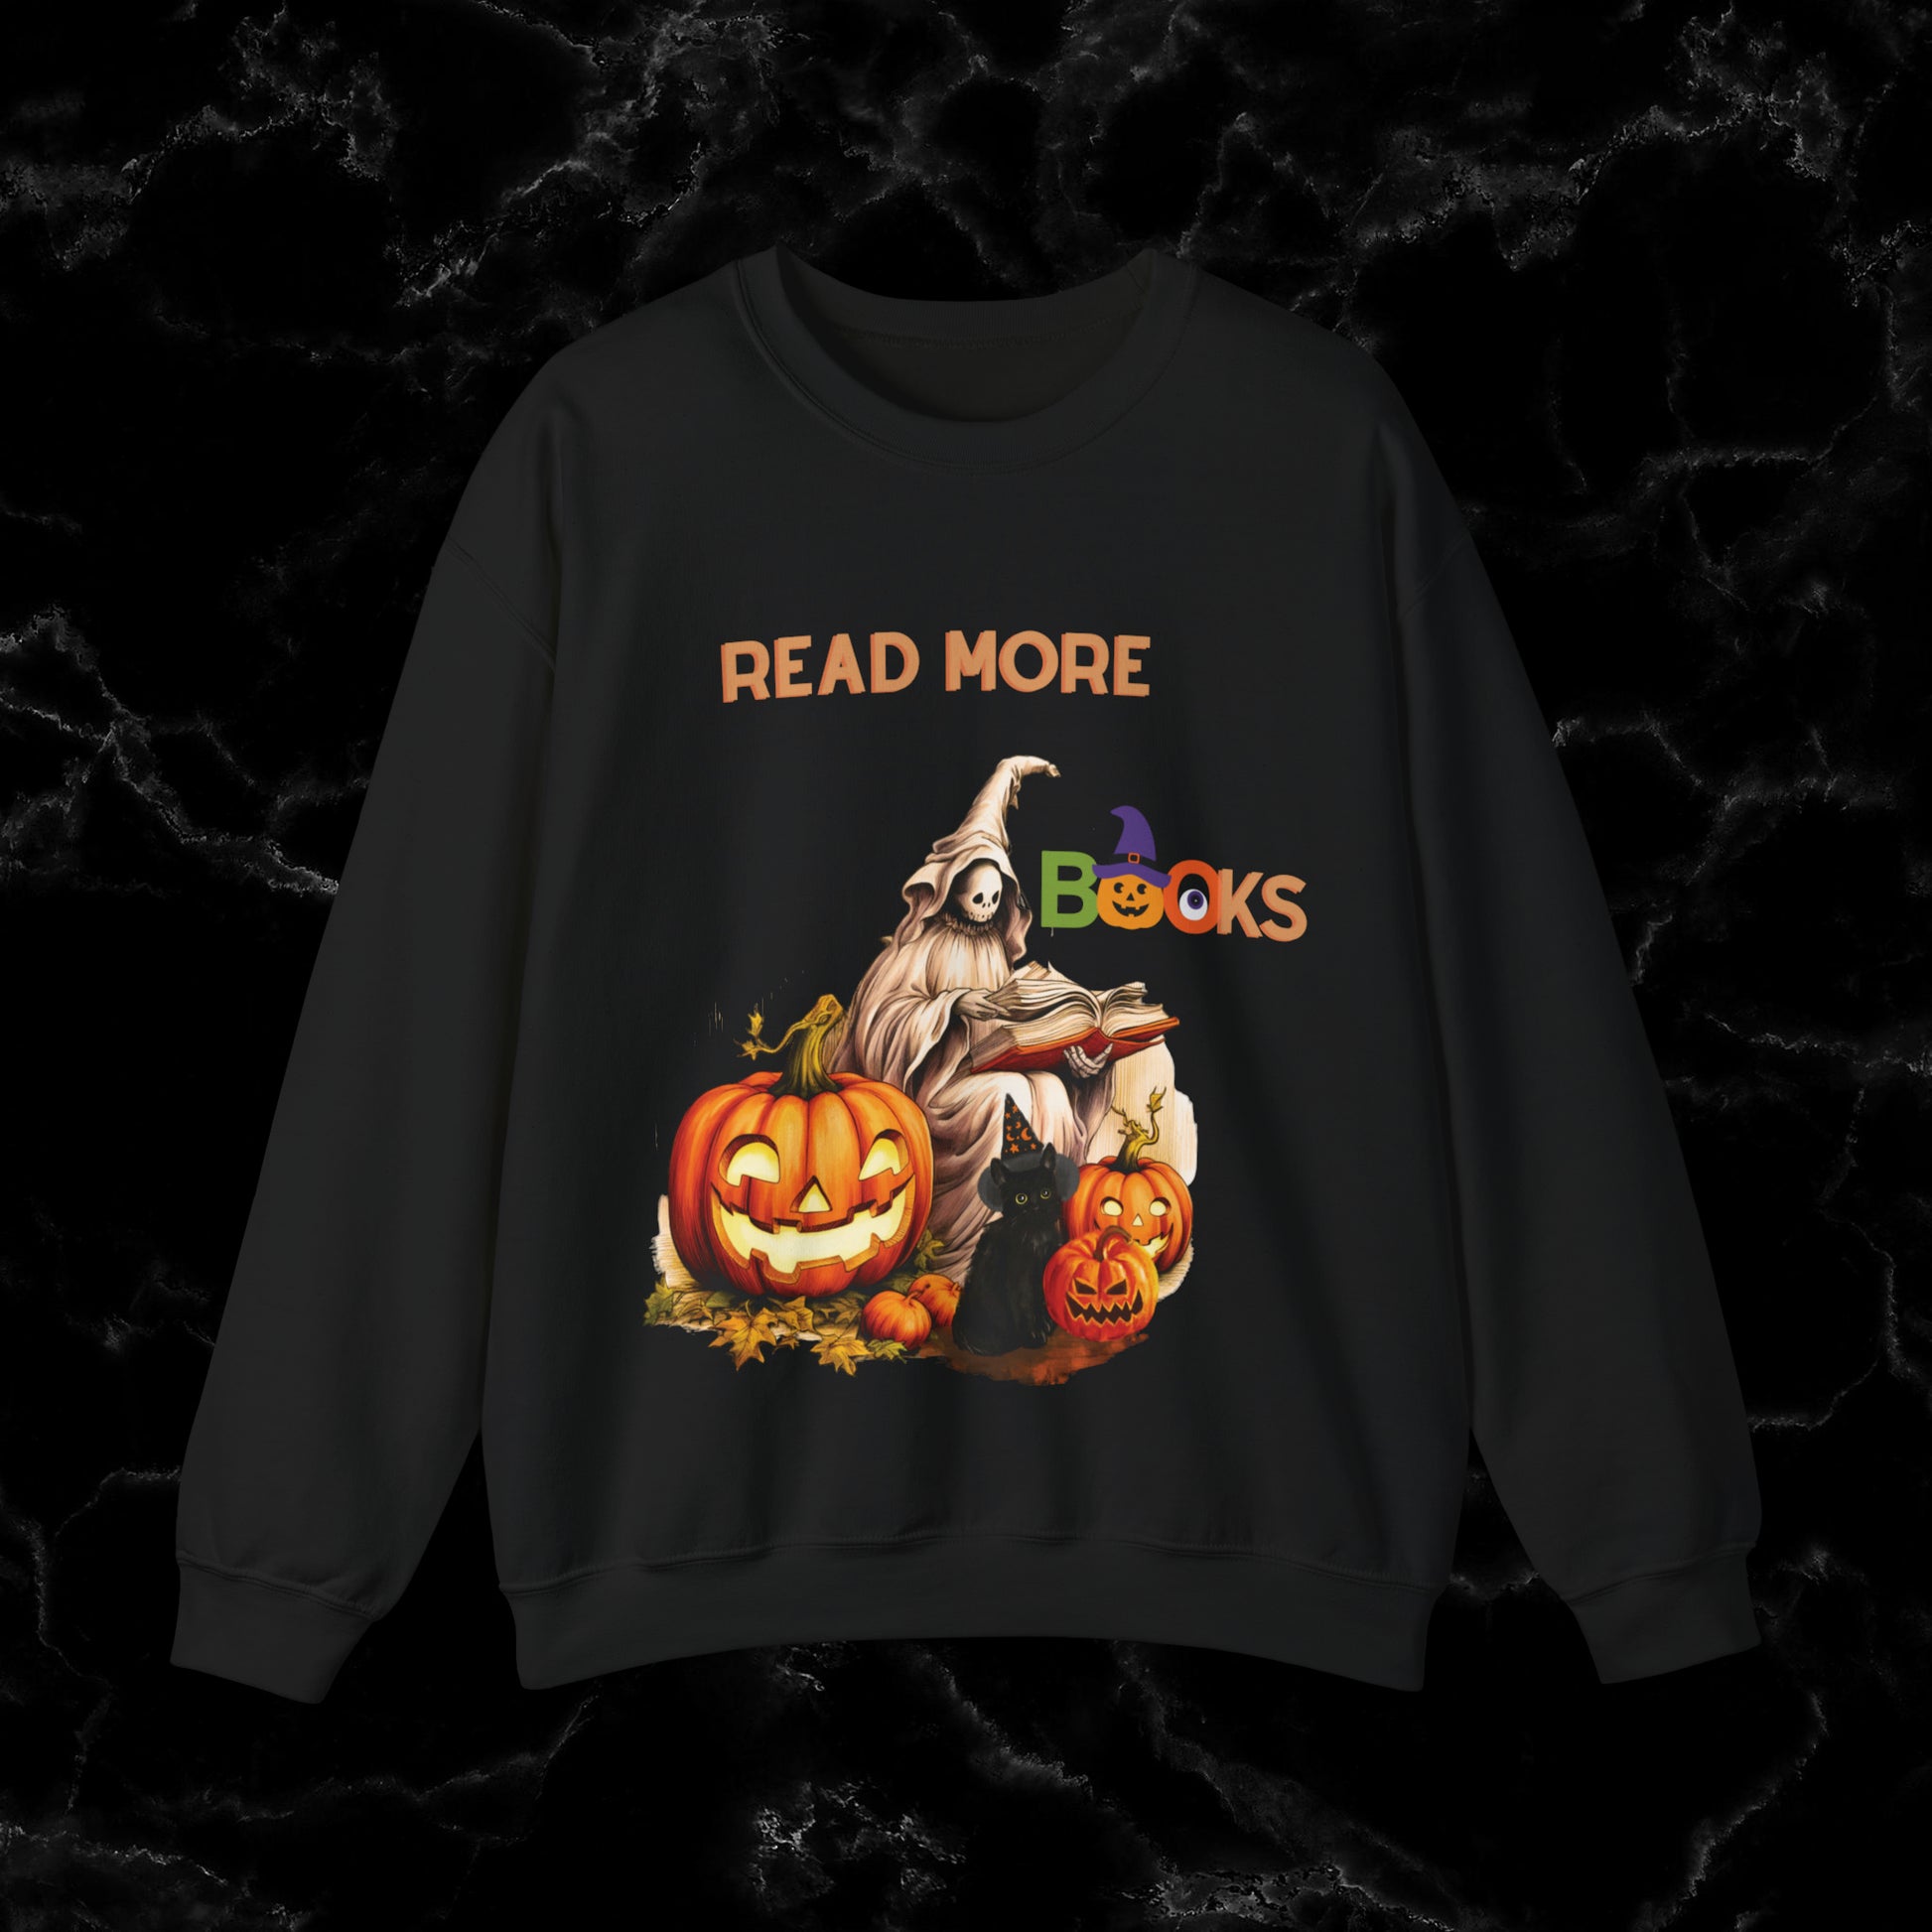 Read More Books Sweatshirt - Book Lover Halloween Sweater for Librarians and Students Sweatshirt S Black 